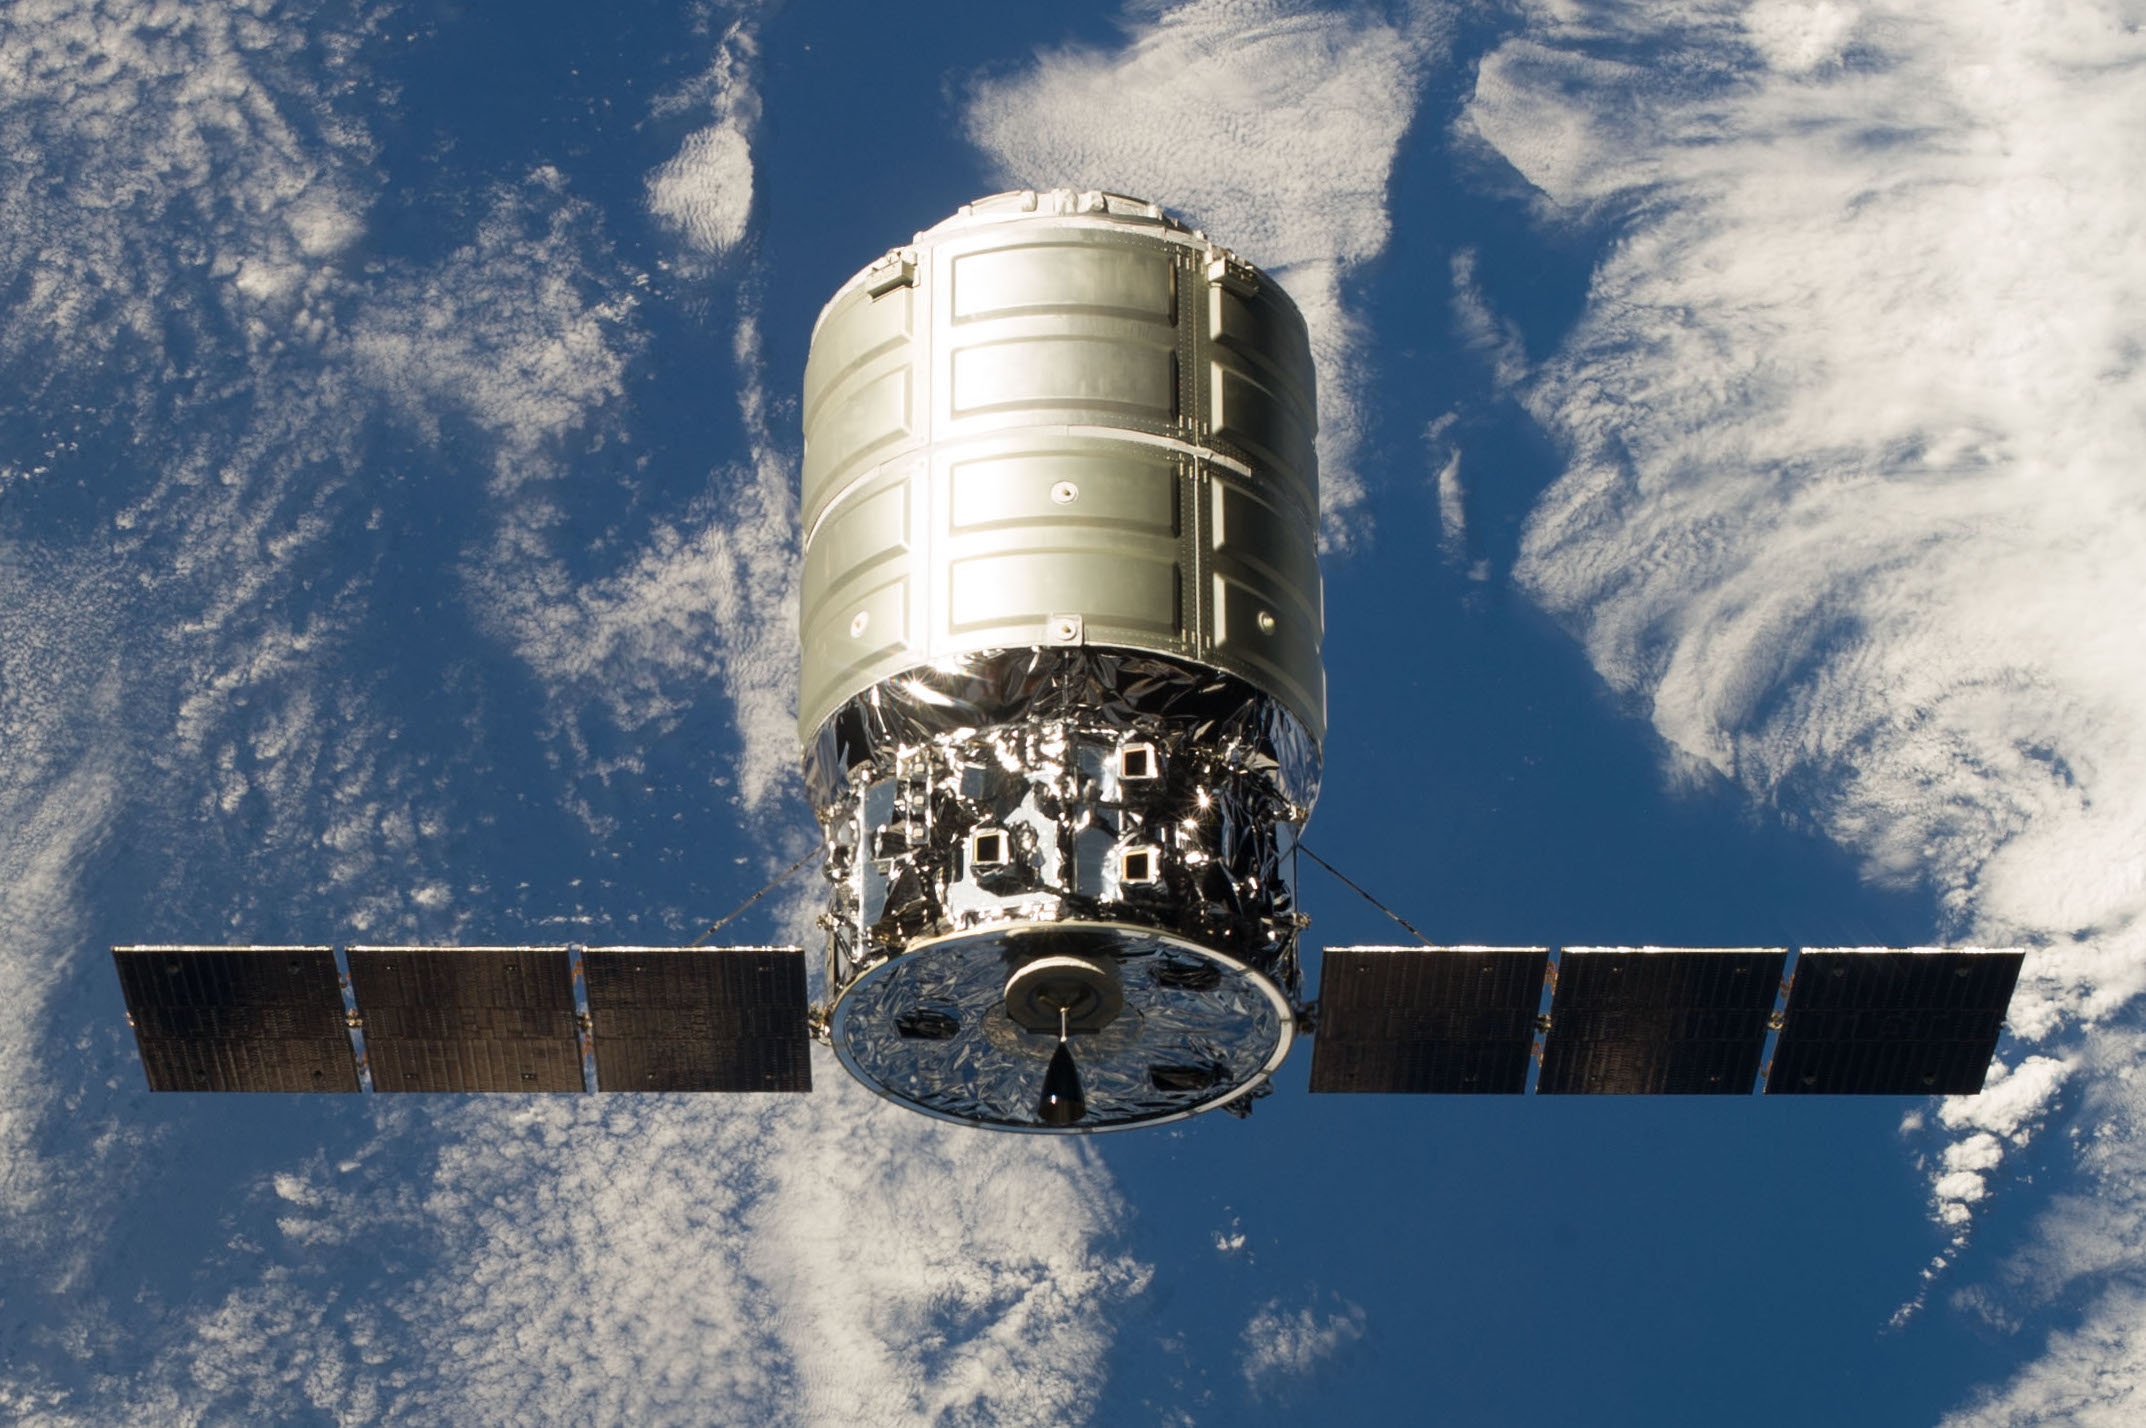 The first Cyngus capsule flew supplies to the space station in early 2014. Image: NASA